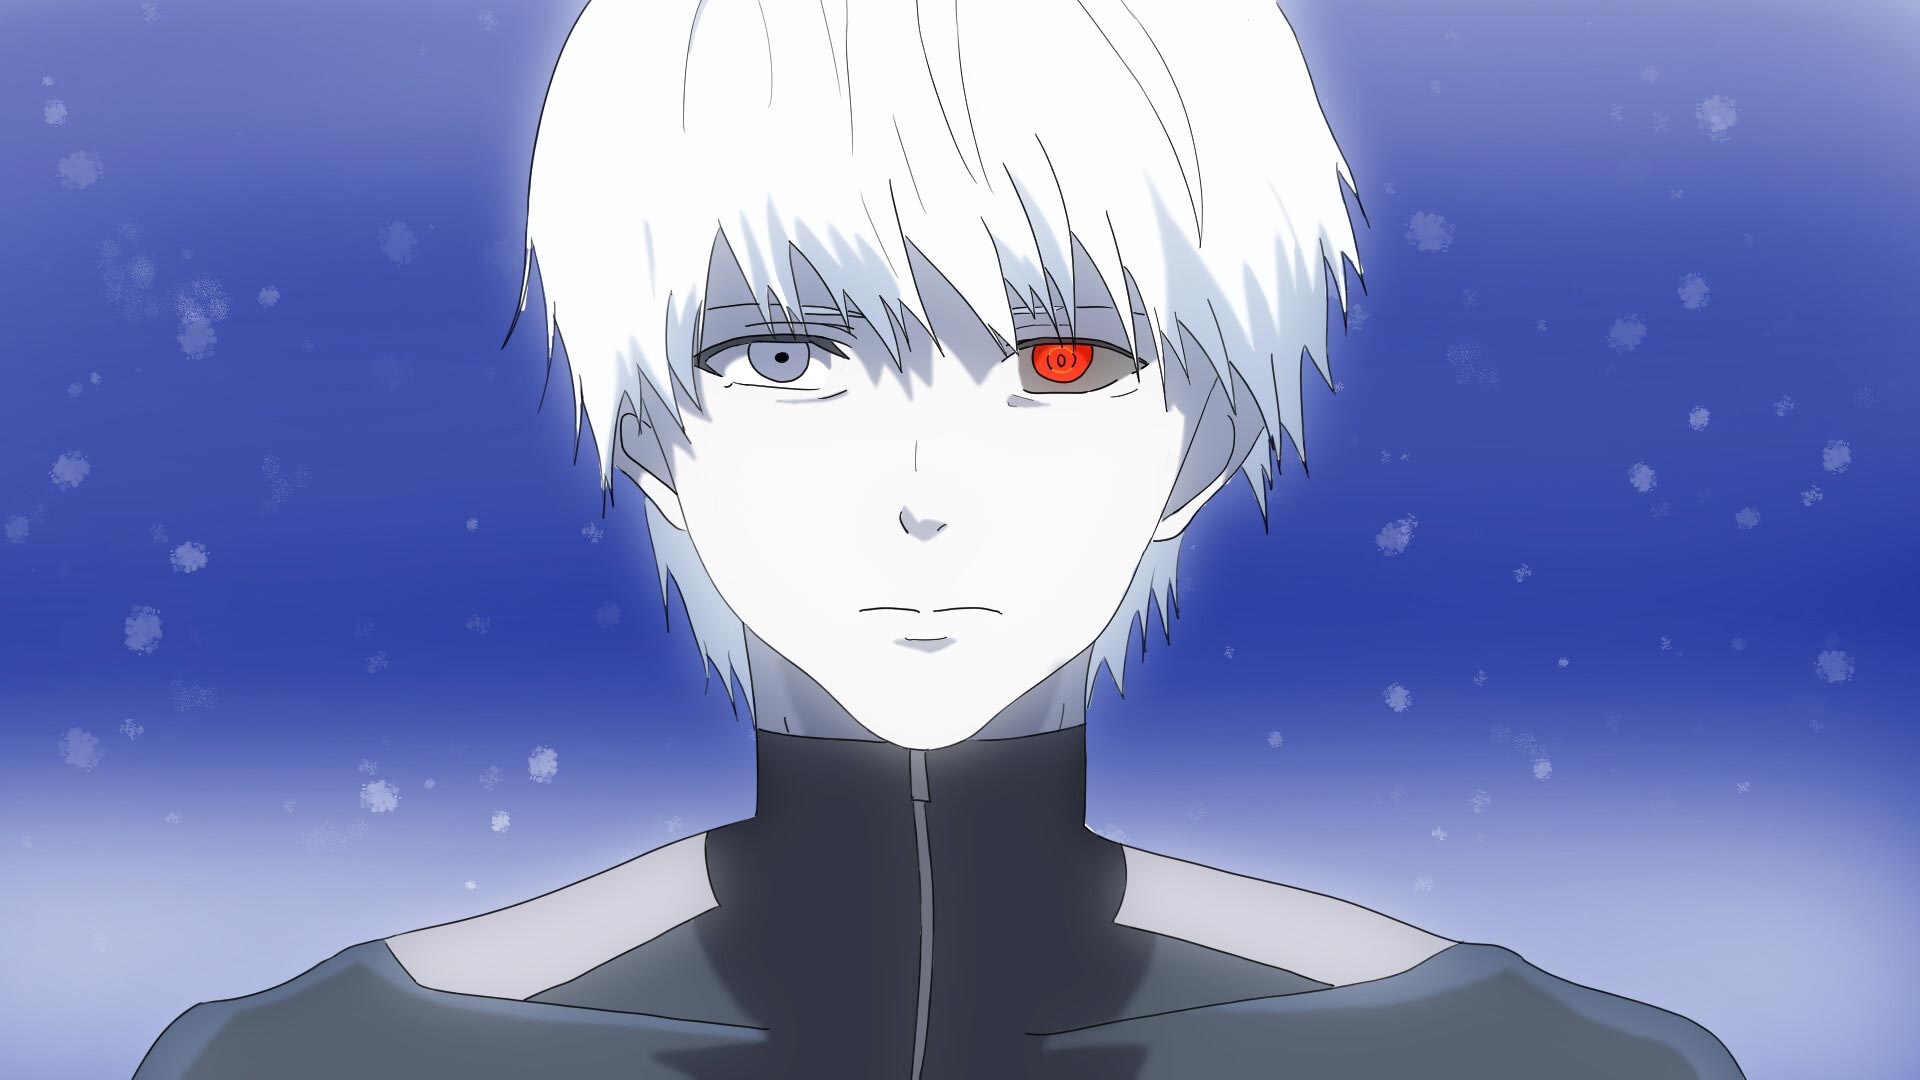 Tokyo Ghoul: Root A wallpapers, Top images, Tokyo Ghoul fan favorites, Ongoing inspiration, 1920x1080 Full HD Desktop